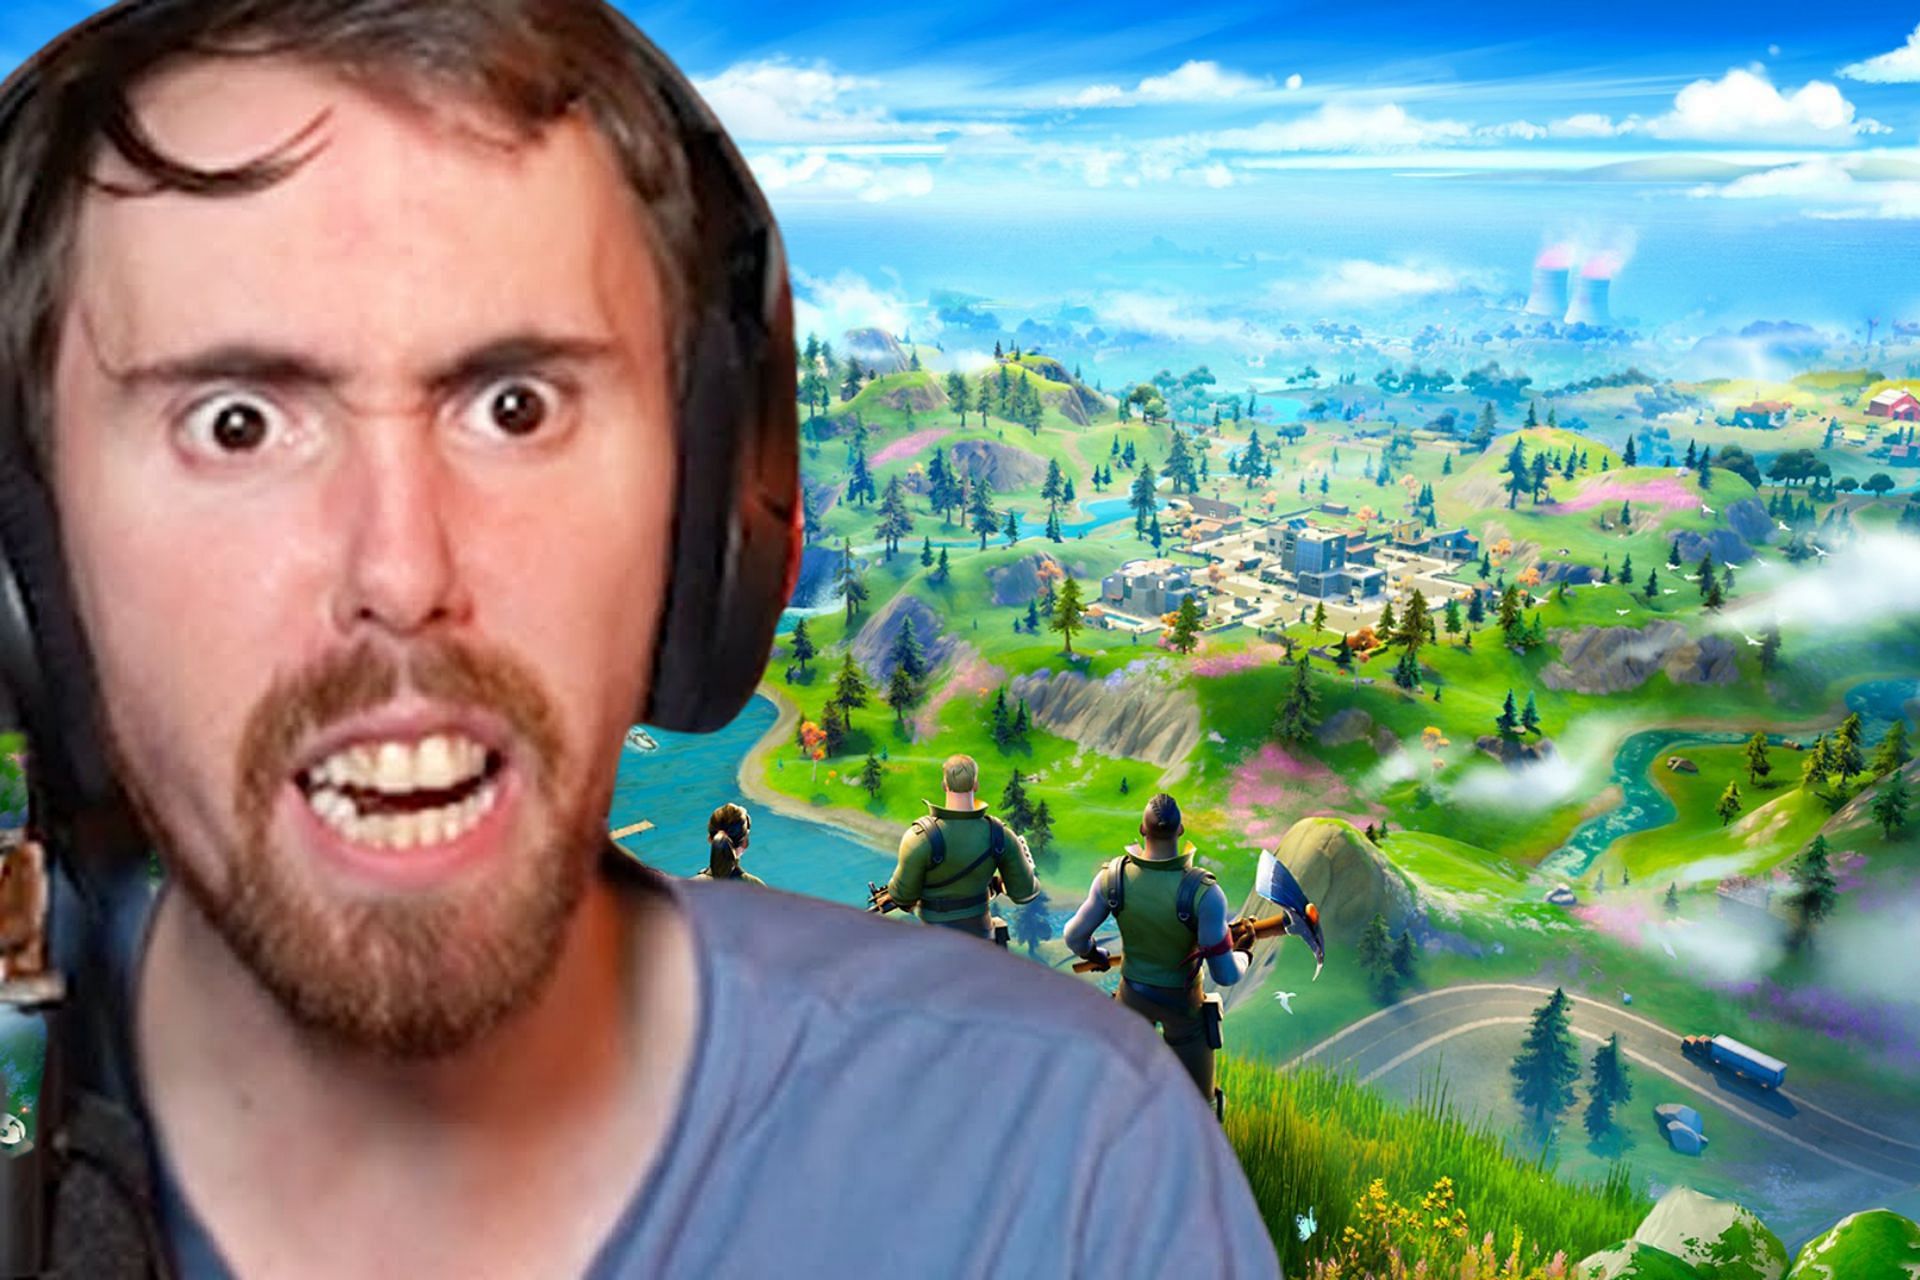 Asmongold loses it completely after being outplayed by a player in Fortnite (Image via Sportskeeda)